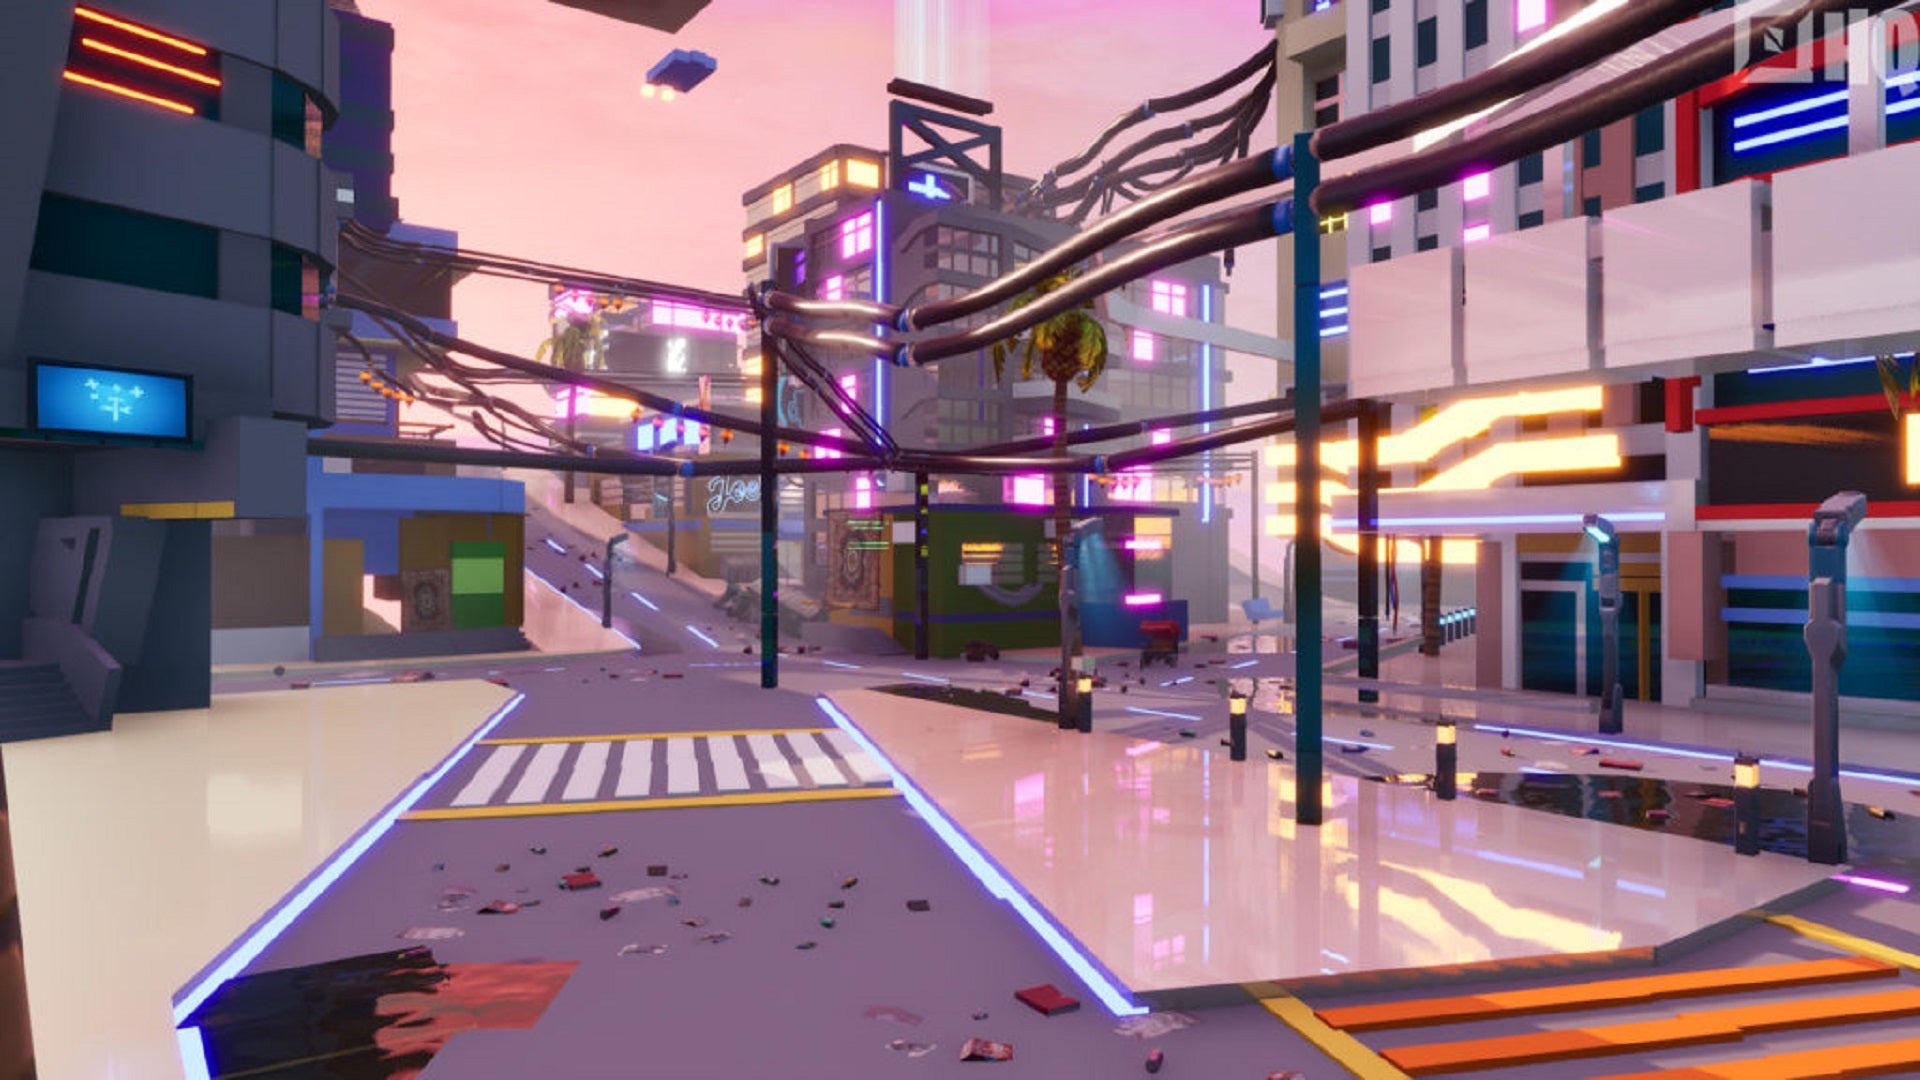 A neon-lit street from Cyberpunk 2077's Night City, as recreated in Fortnite Creative.